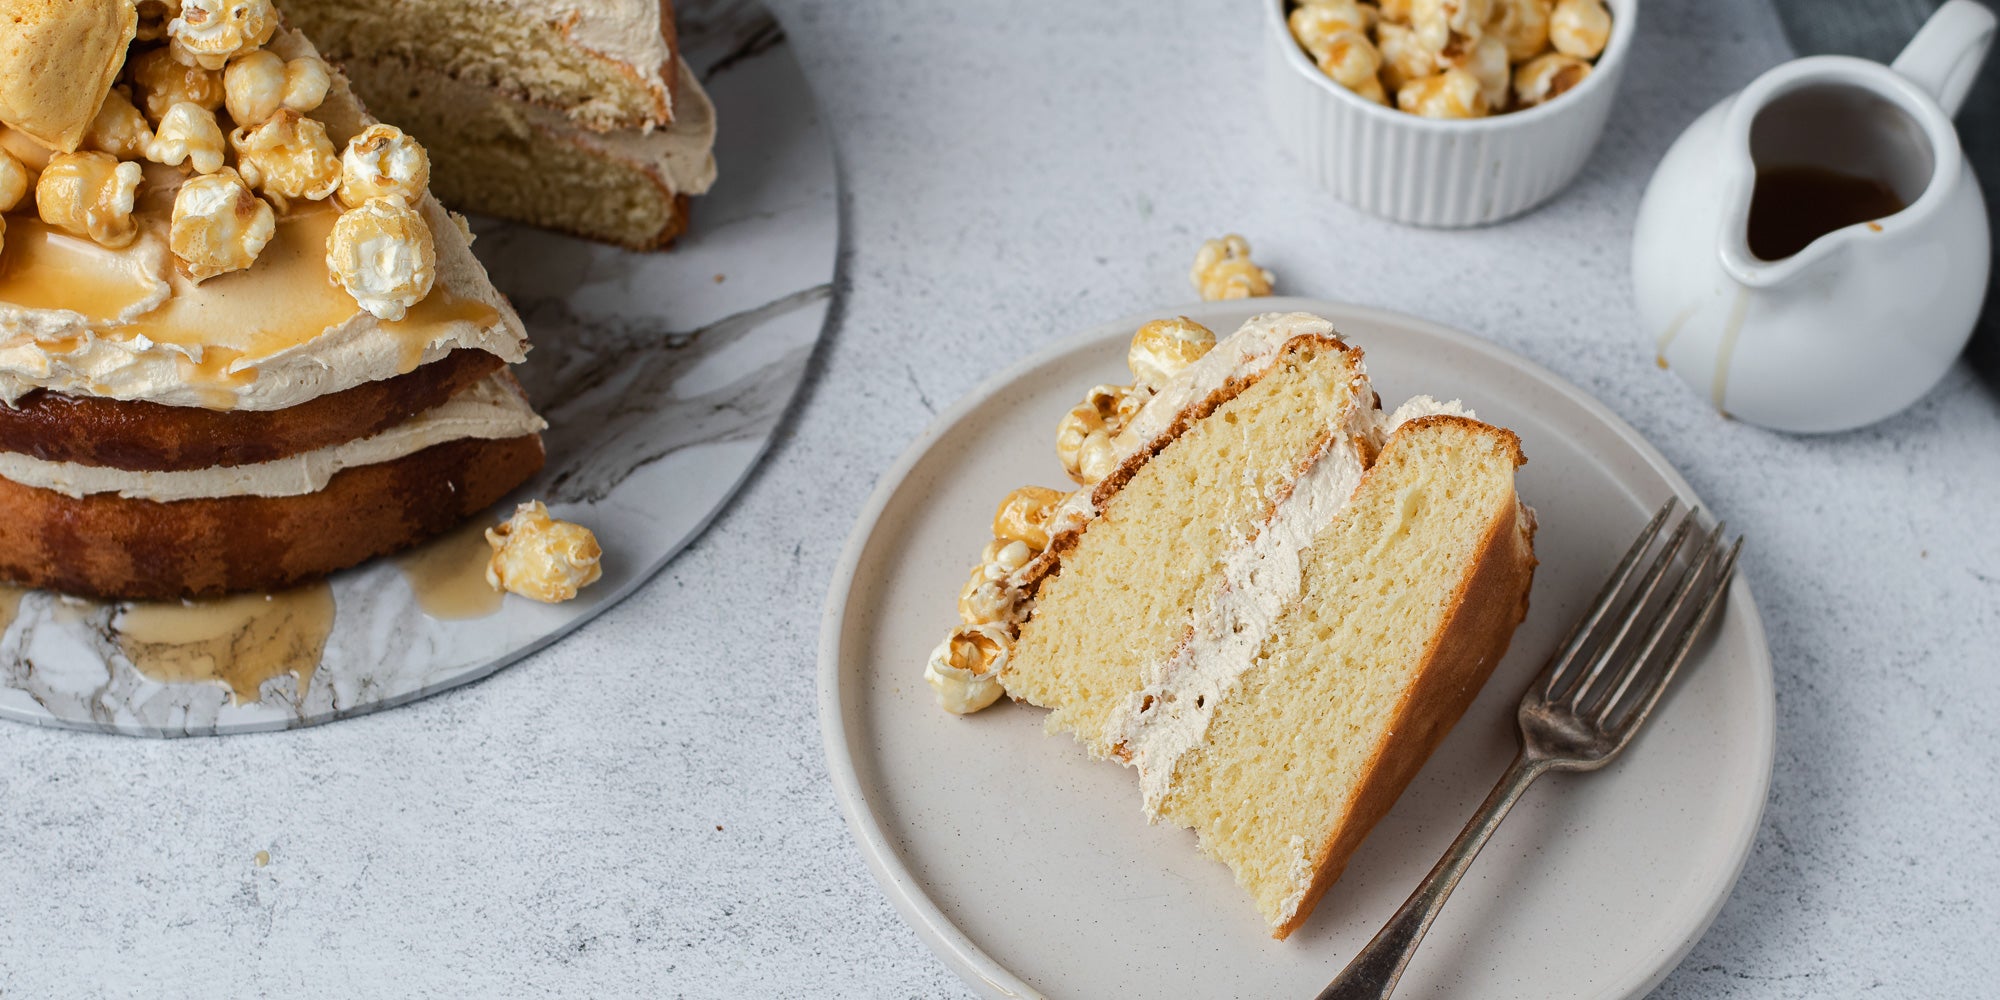 Caramel Cake topped with popcorn